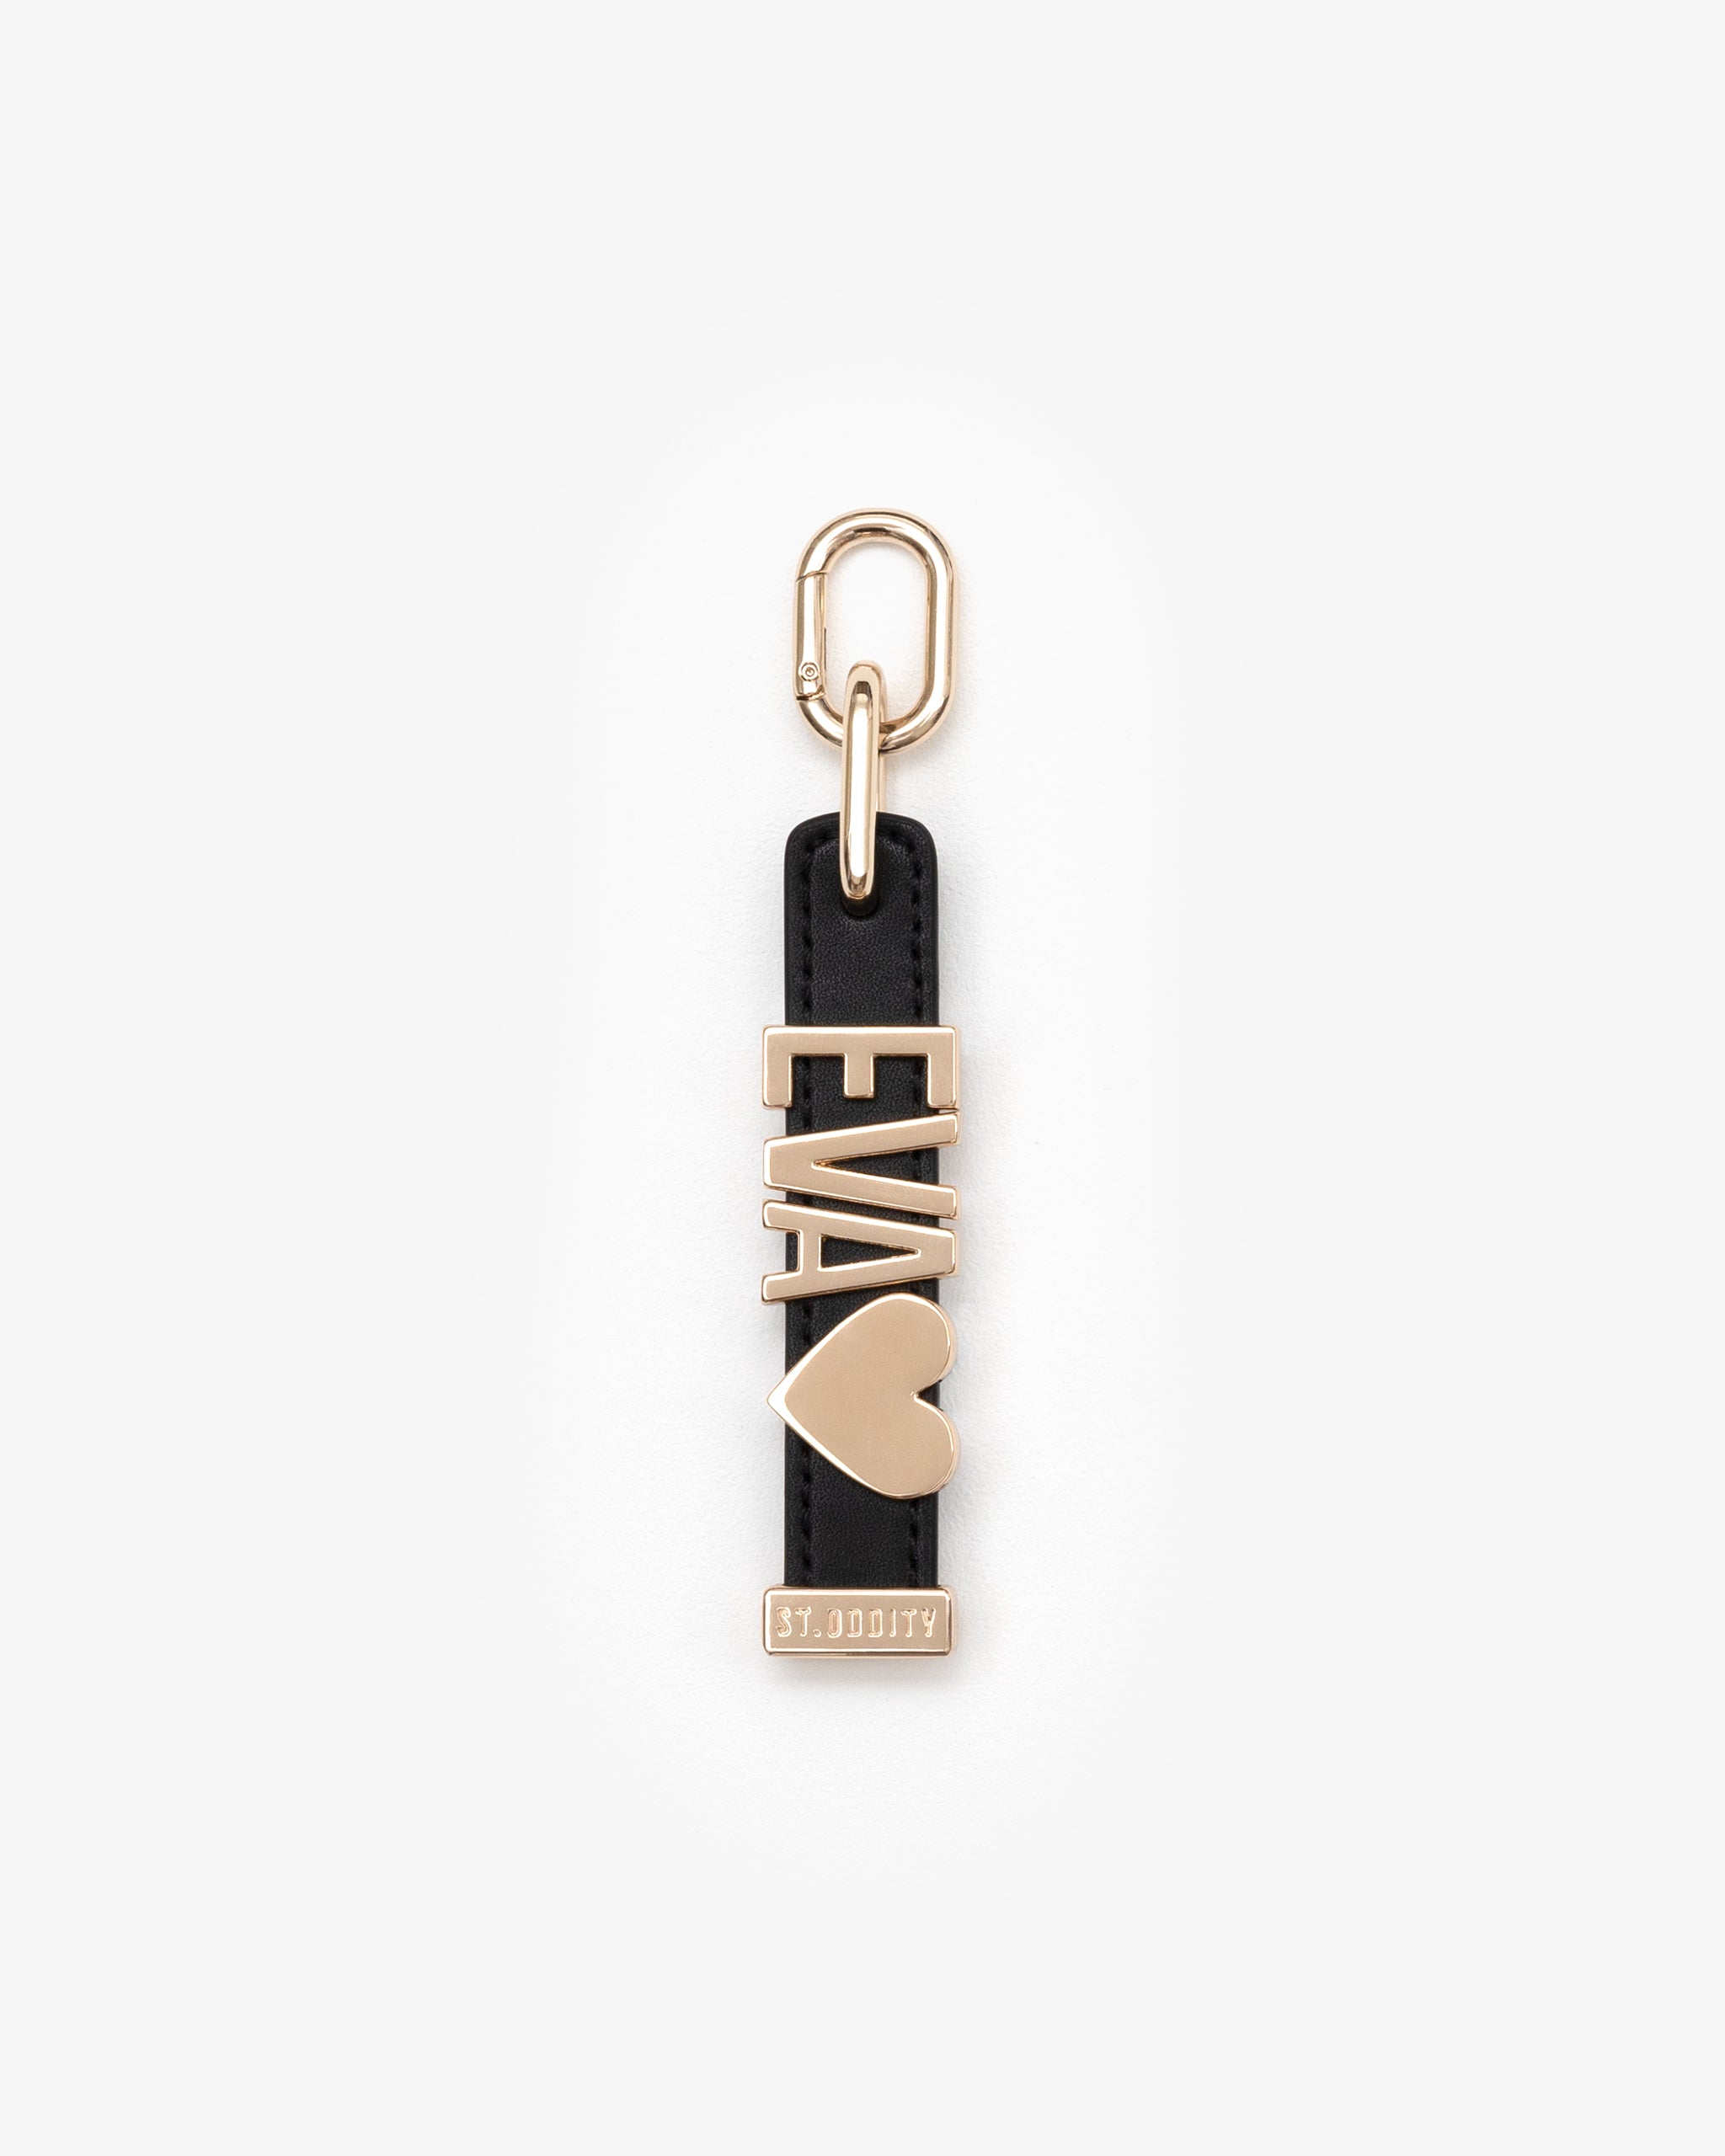 Pre-order (Mid-May): Charm in Black/Gold with Personalised Hardware